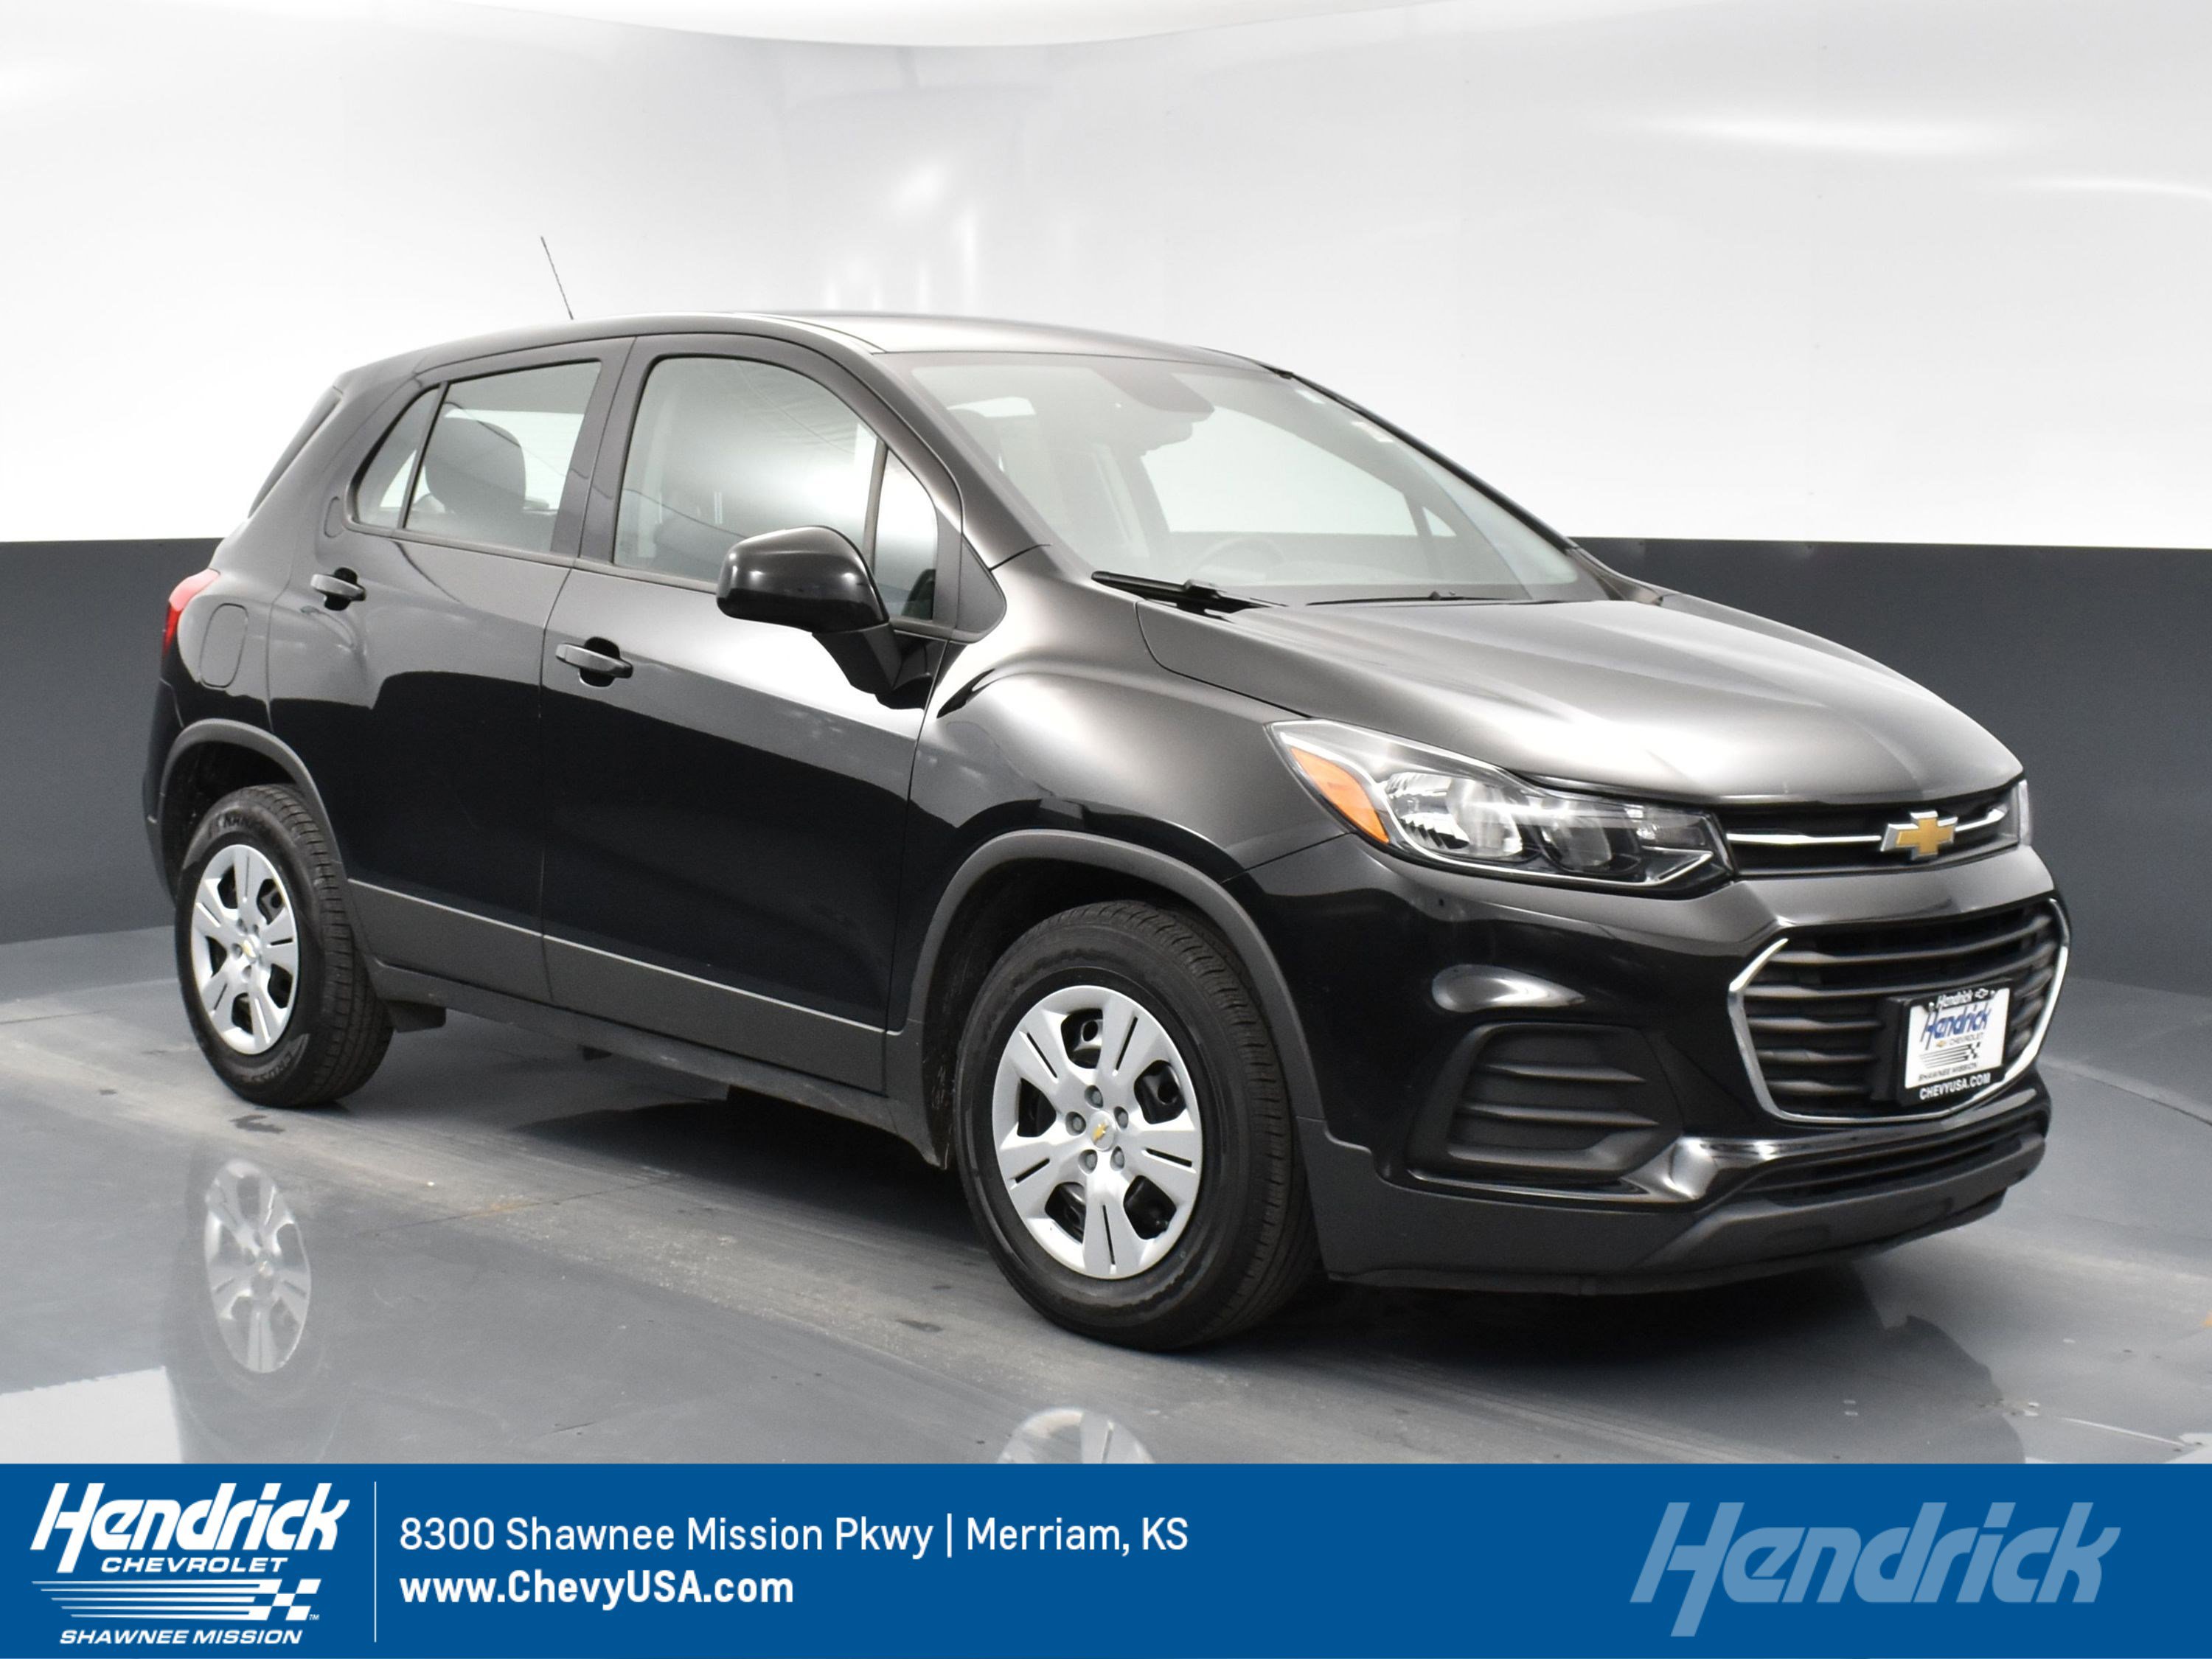 Certified Pre-Owned 2018 Chevrolet Trax LS SUV in Merriam #PSD1707 |  Hendrick Chevrolet Shawnee Mission